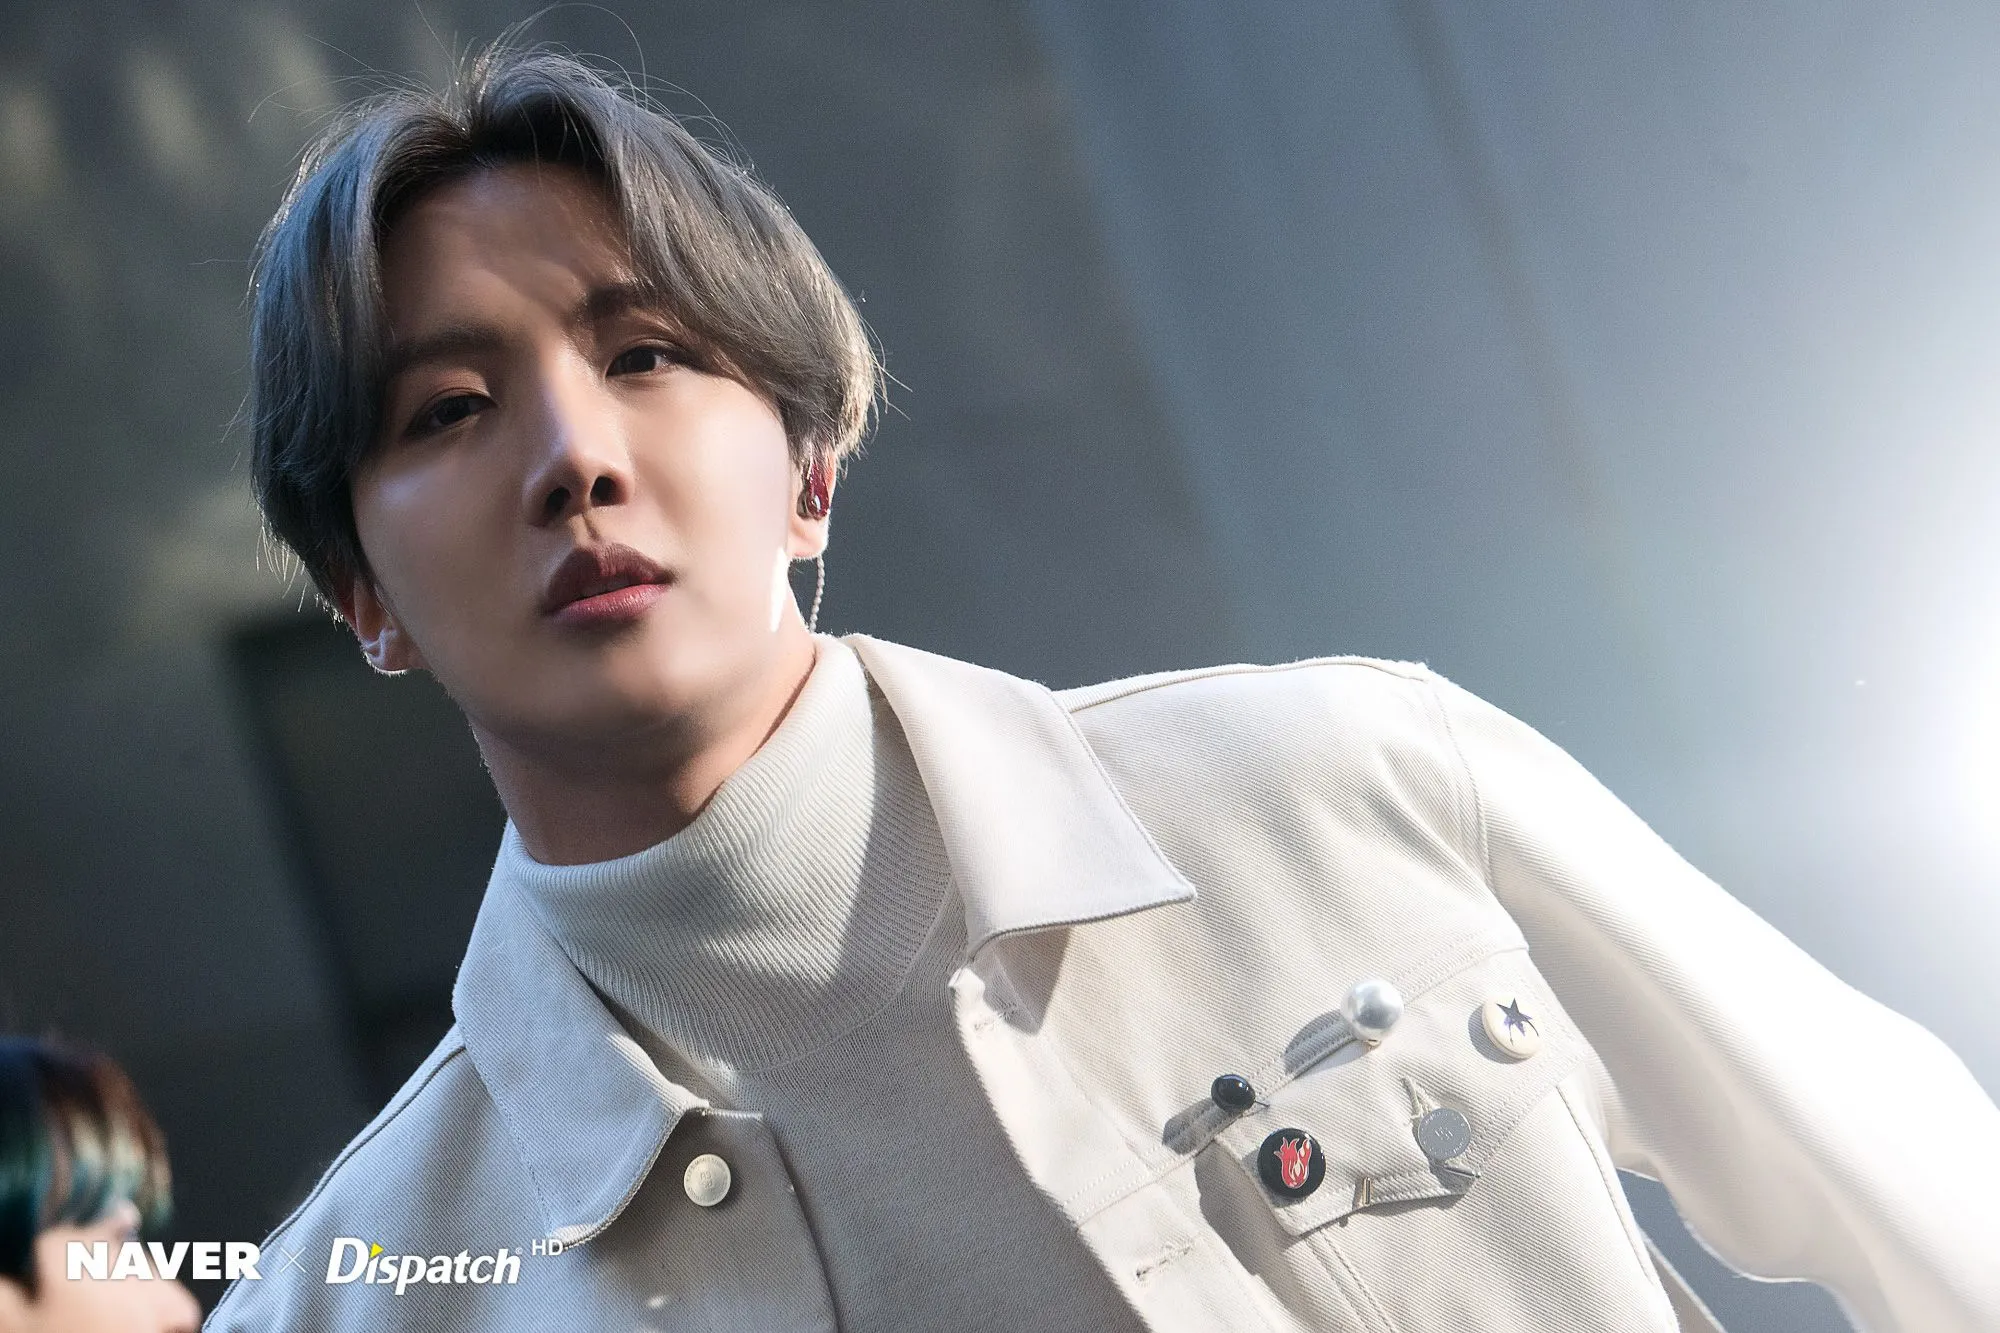 NAVER x DISPATCH ] BTS' J-Hope Christmas Pictures (181130), 181224